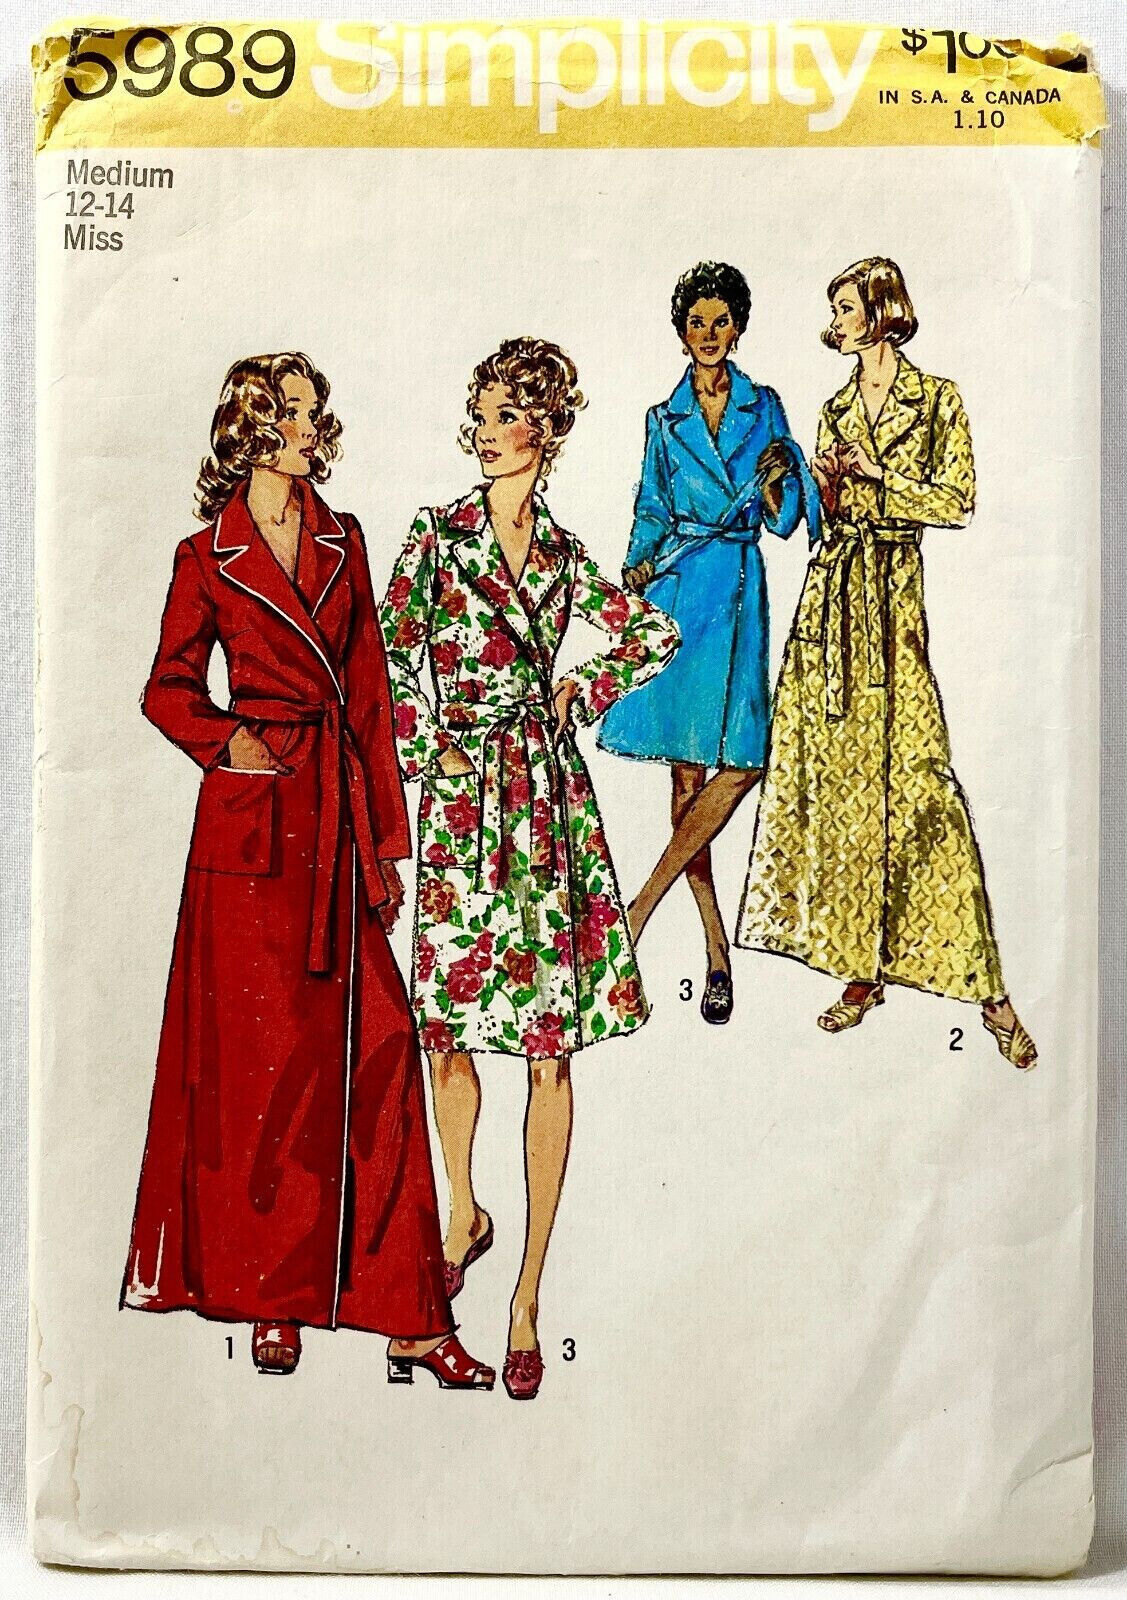 1973 Simplicity Sewing Pattern 5989 Womens Robe 2 Lengths Size 12-14 Vintg 12488